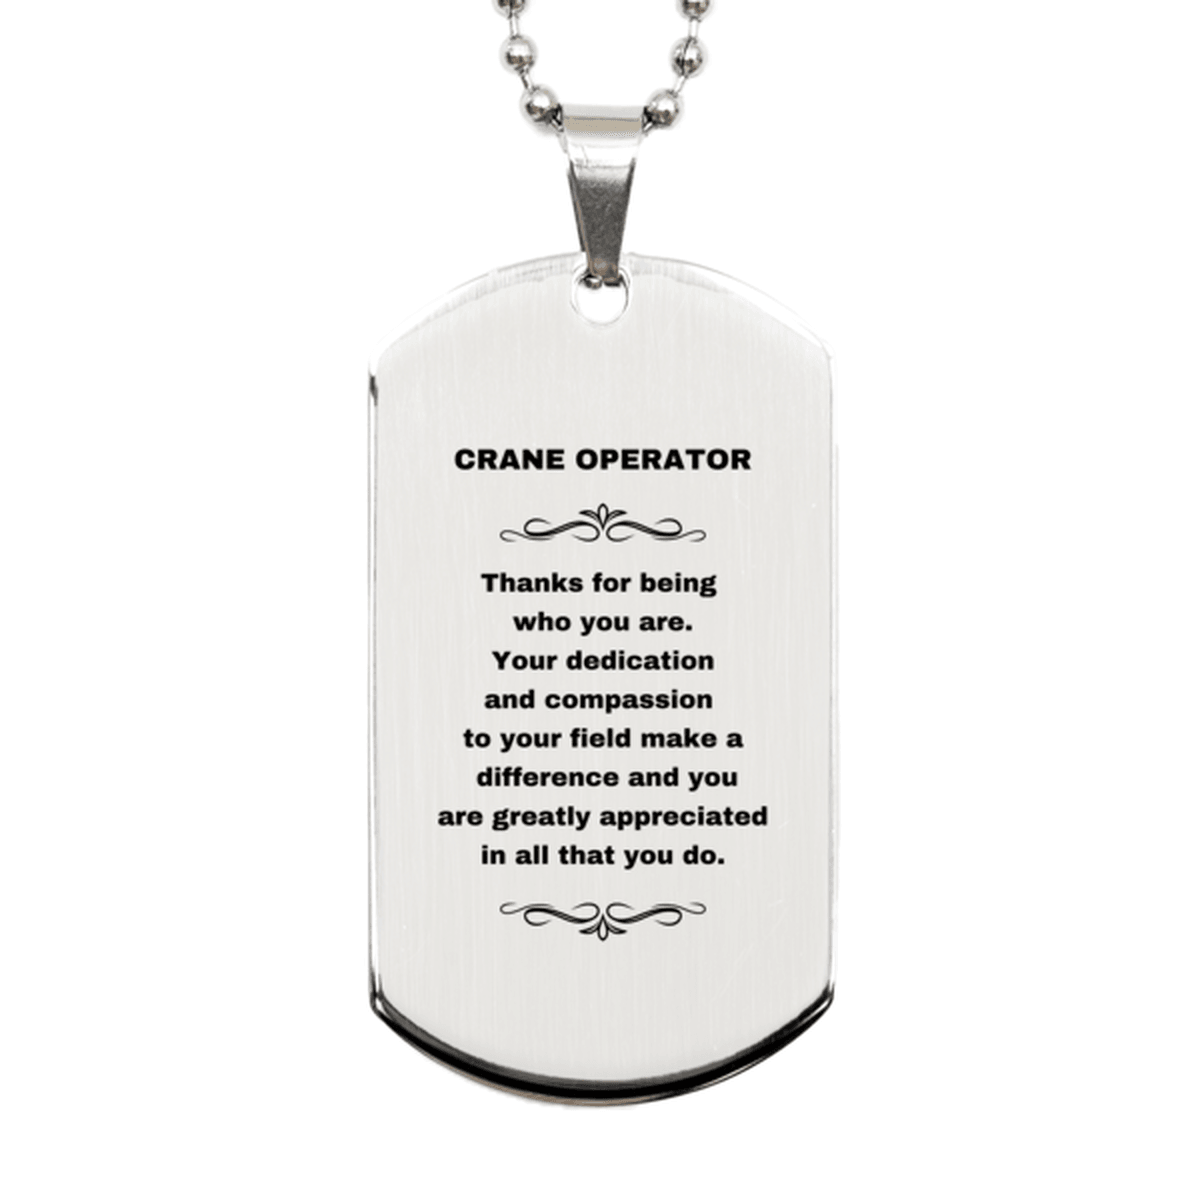 Crane Operator Silver Dog Tag Necklace Engraved Bracelet - Thanks for being who you are - Birthday Christmas Jewelry Gifts Coworkers Colleague Boss - Mallard Moon Gift Shop